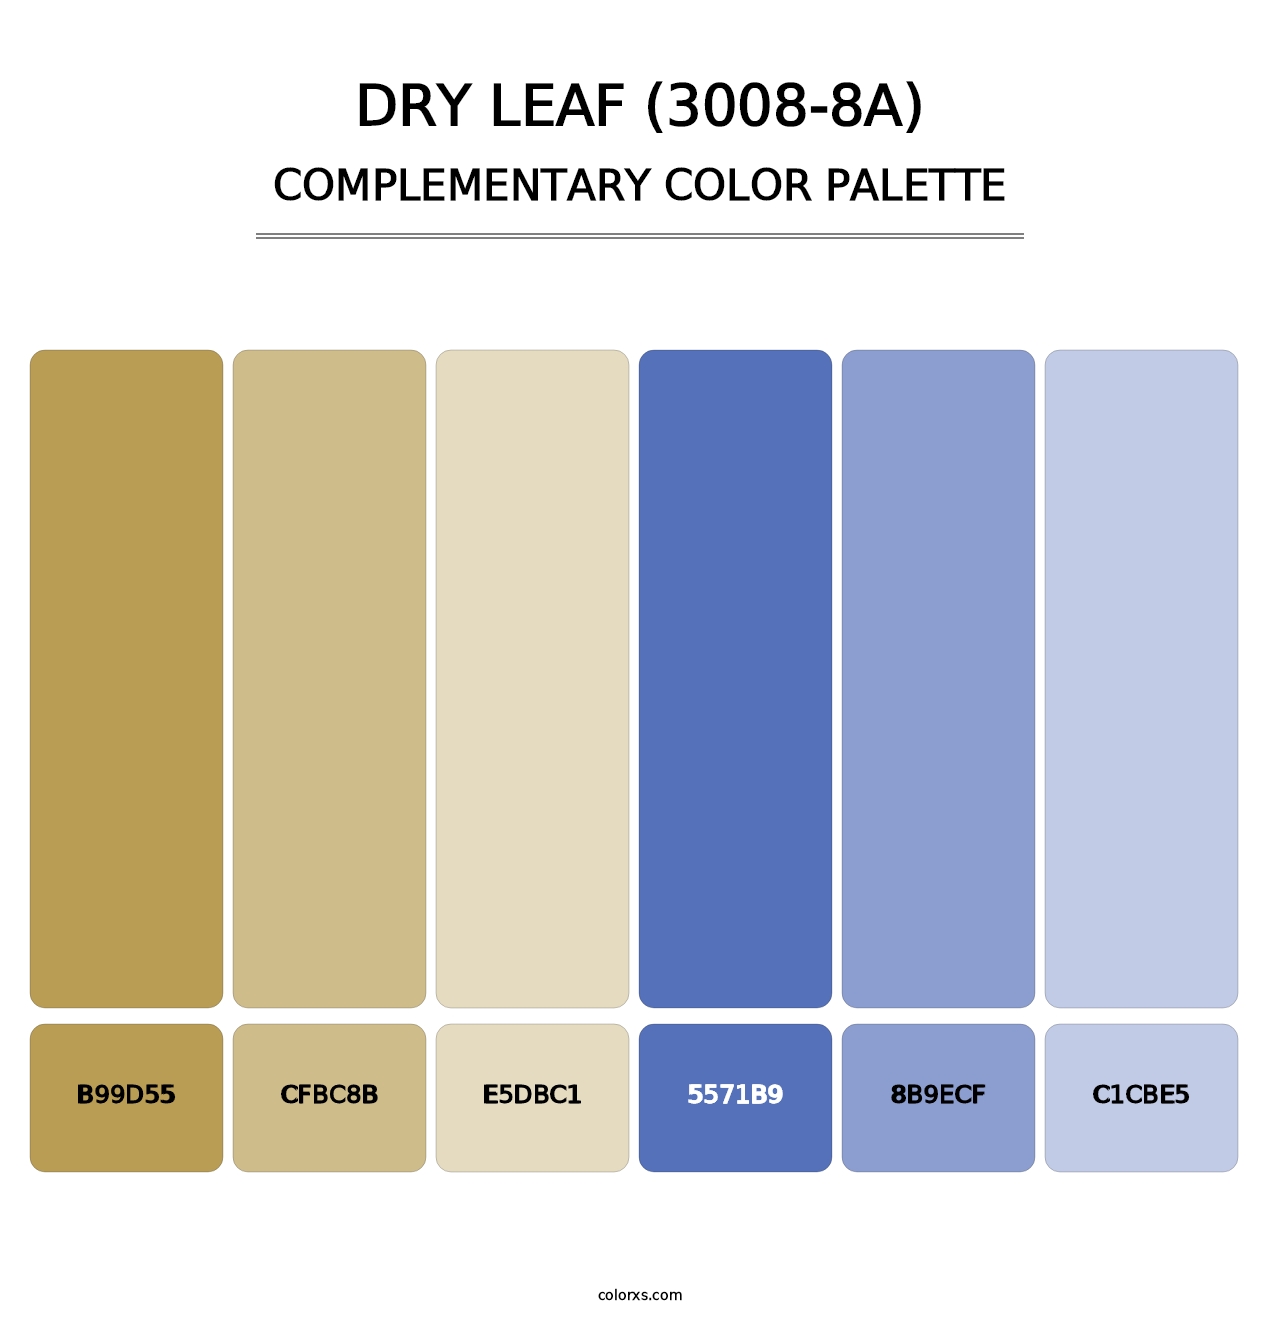 Dry Leaf (3008-8A) - Complementary Color Palette